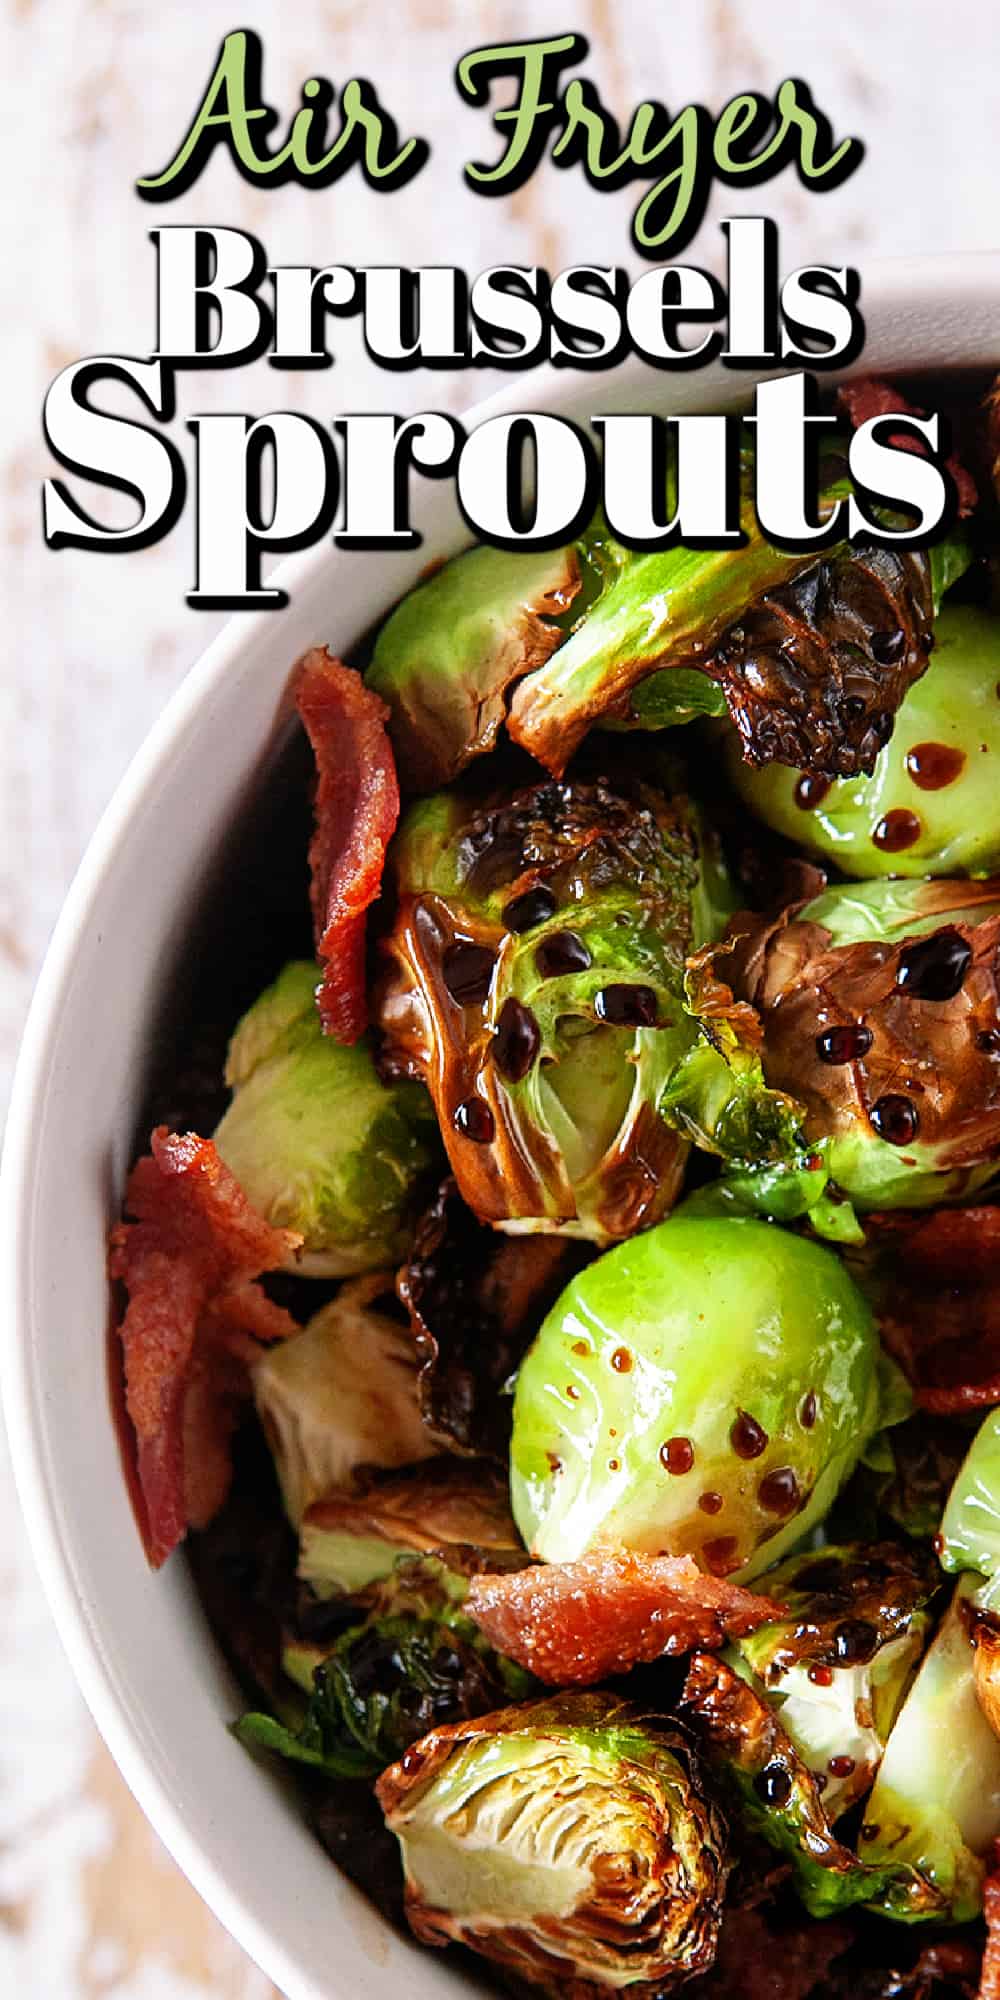 Air Fryer Brussels Sprouts Pin